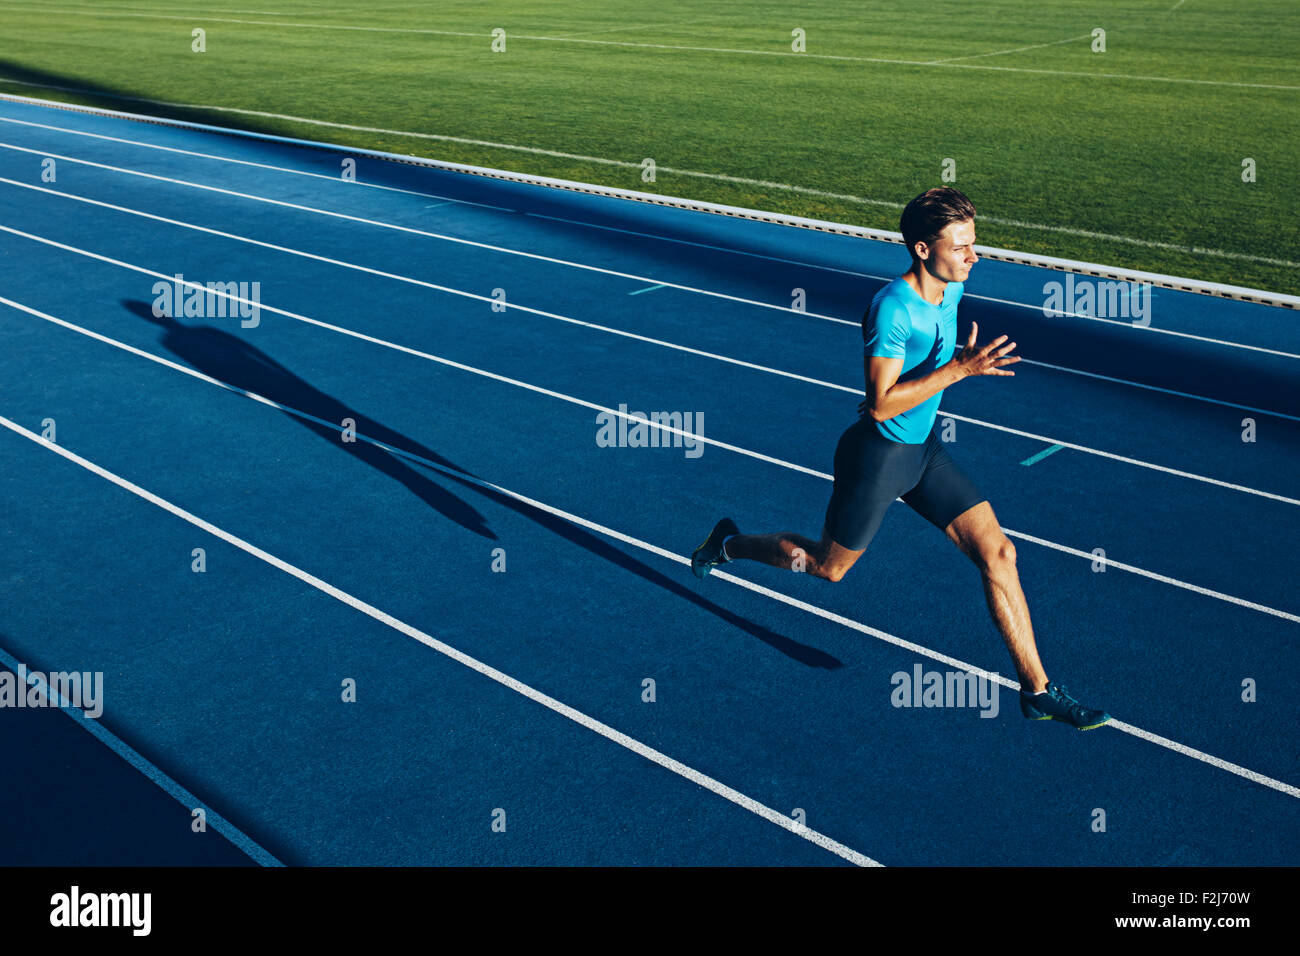 Shot of a young male athlete training on a race track. Sprinter running on athletics tracks. Stock Photo